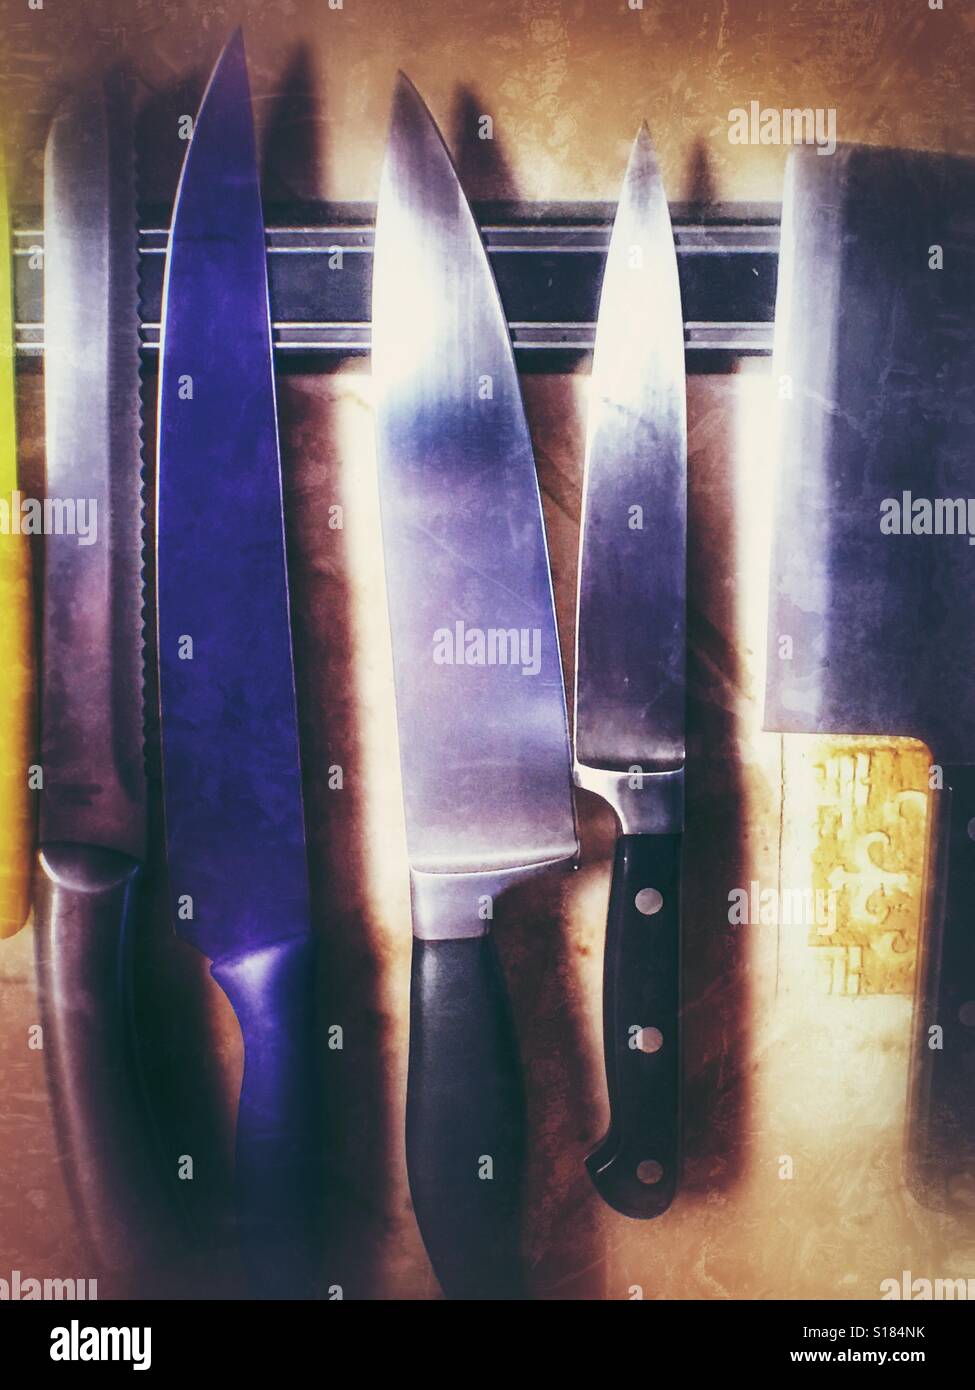 https://c8.alamy.com/comp/S184NK/row-of-knives-hanging-on-a-magnetic-strip-in-a-kitchen-S184NK.jpg